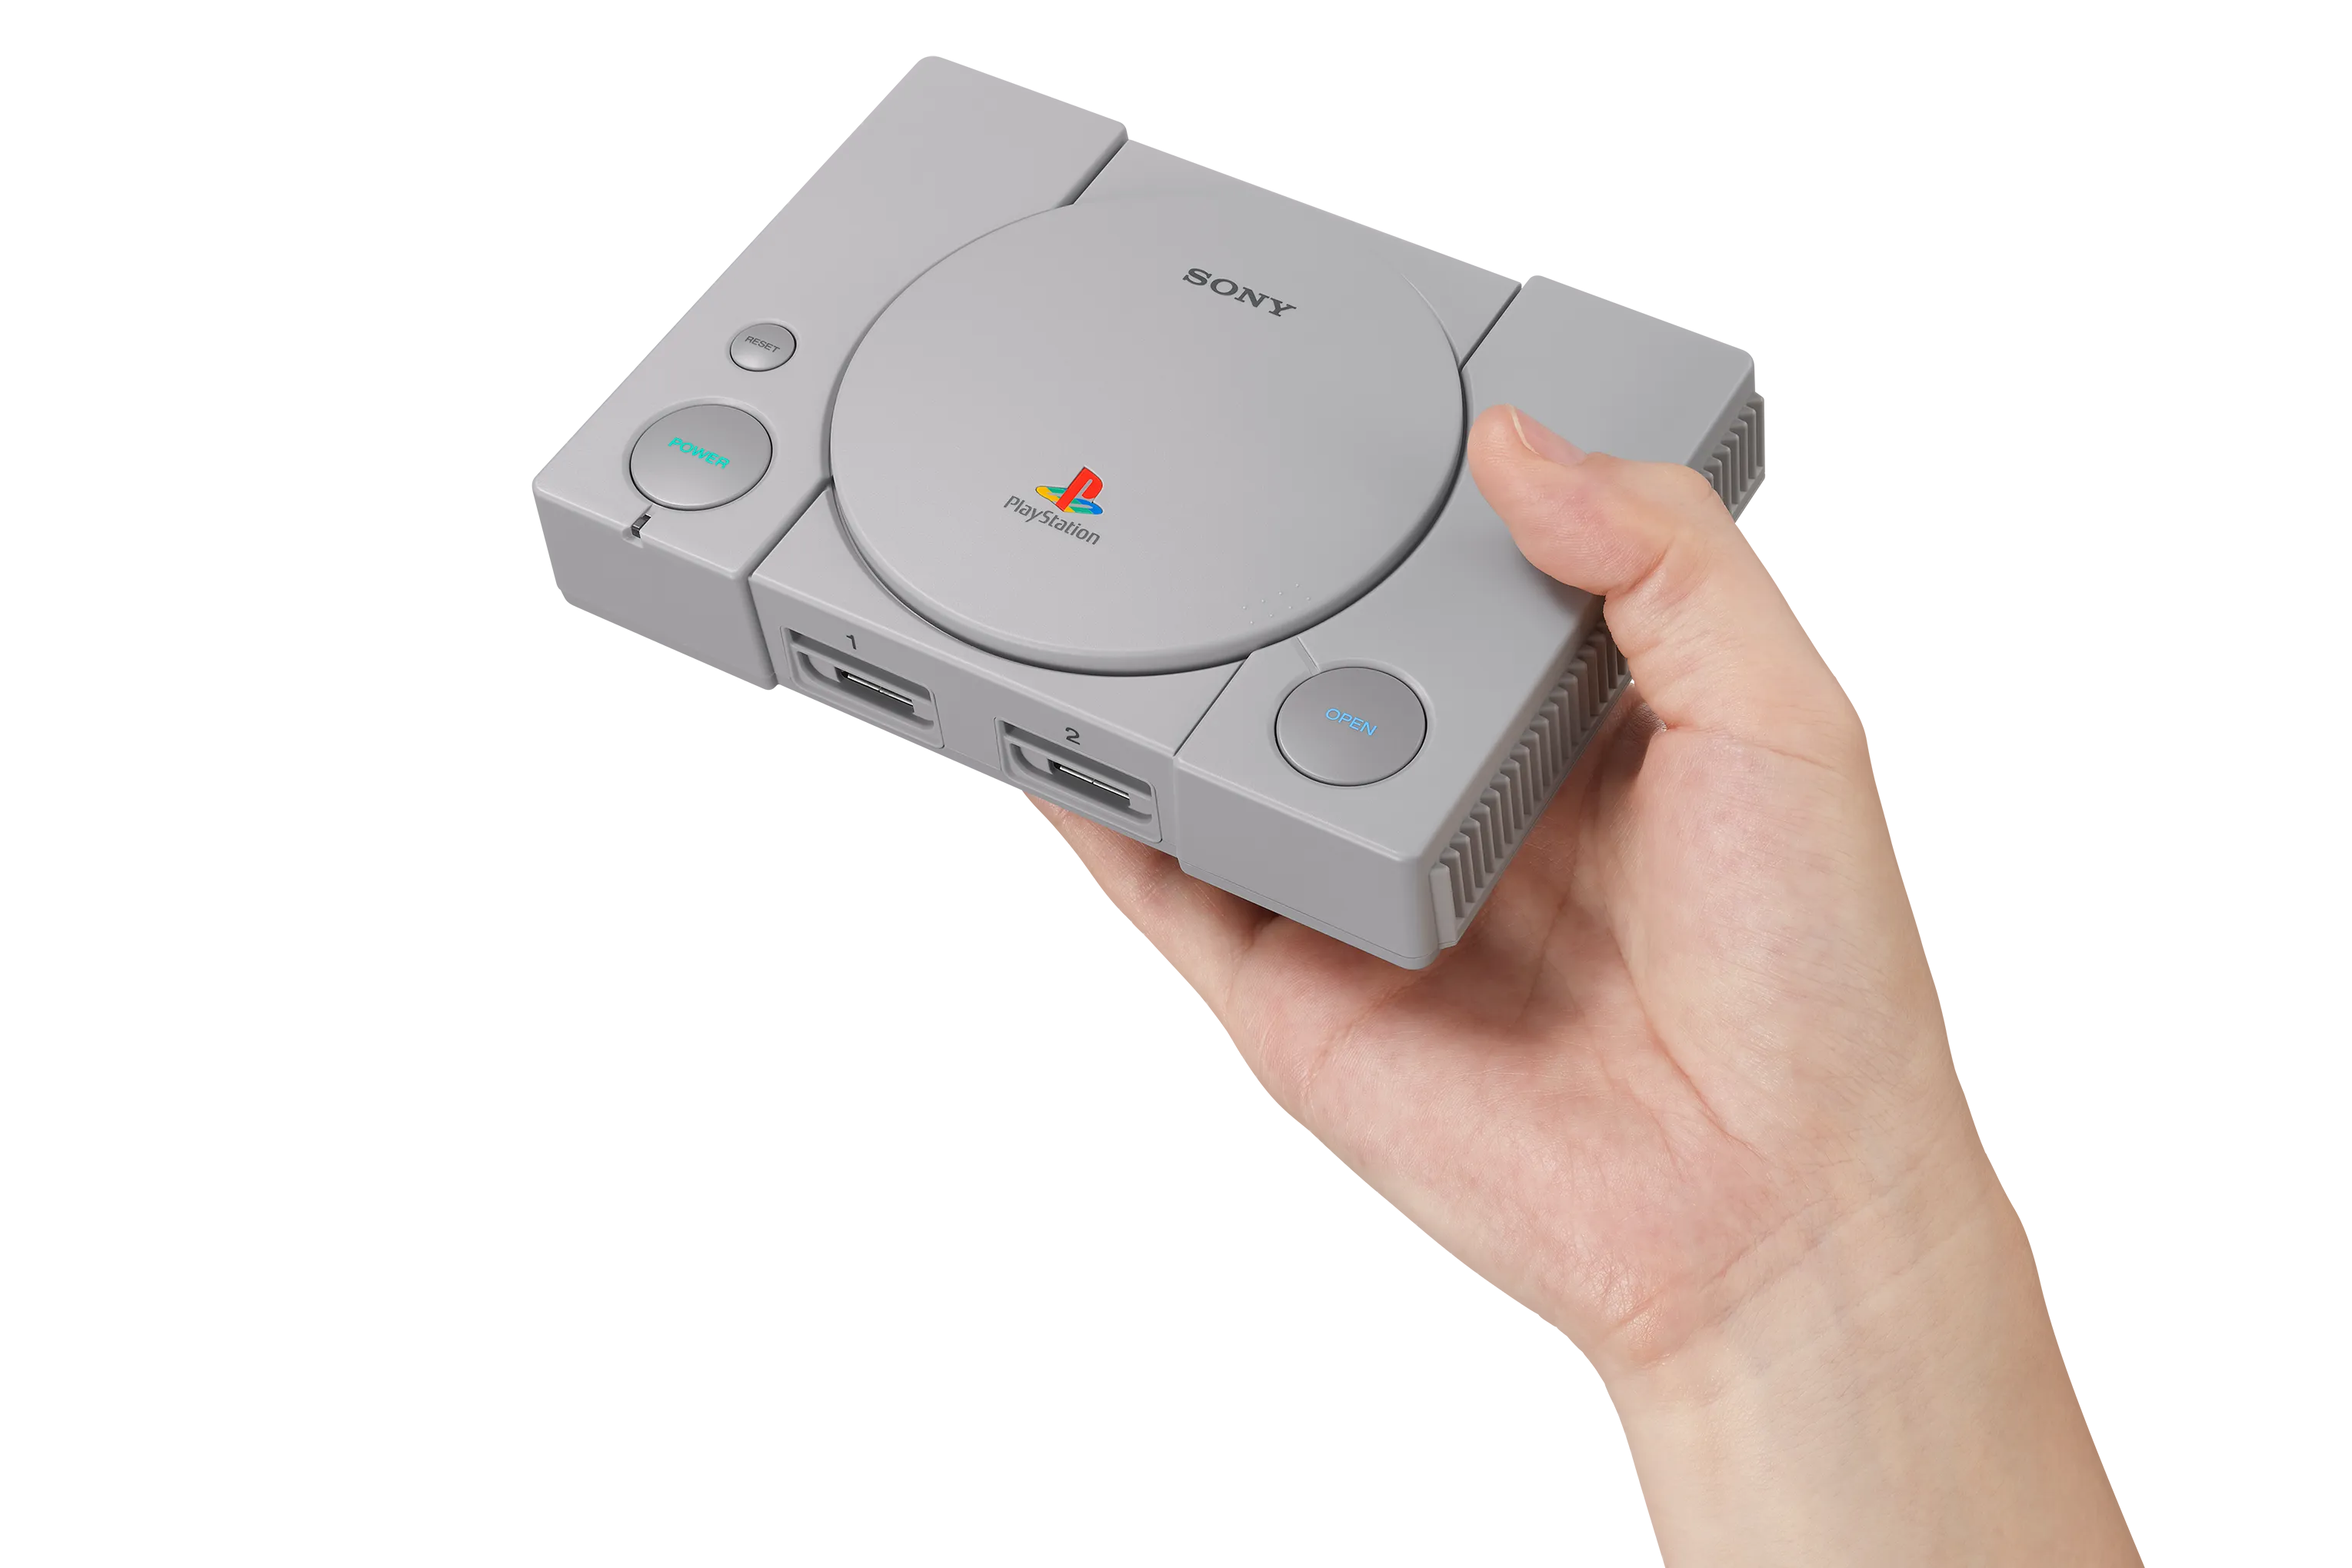 PlayStation Classic 